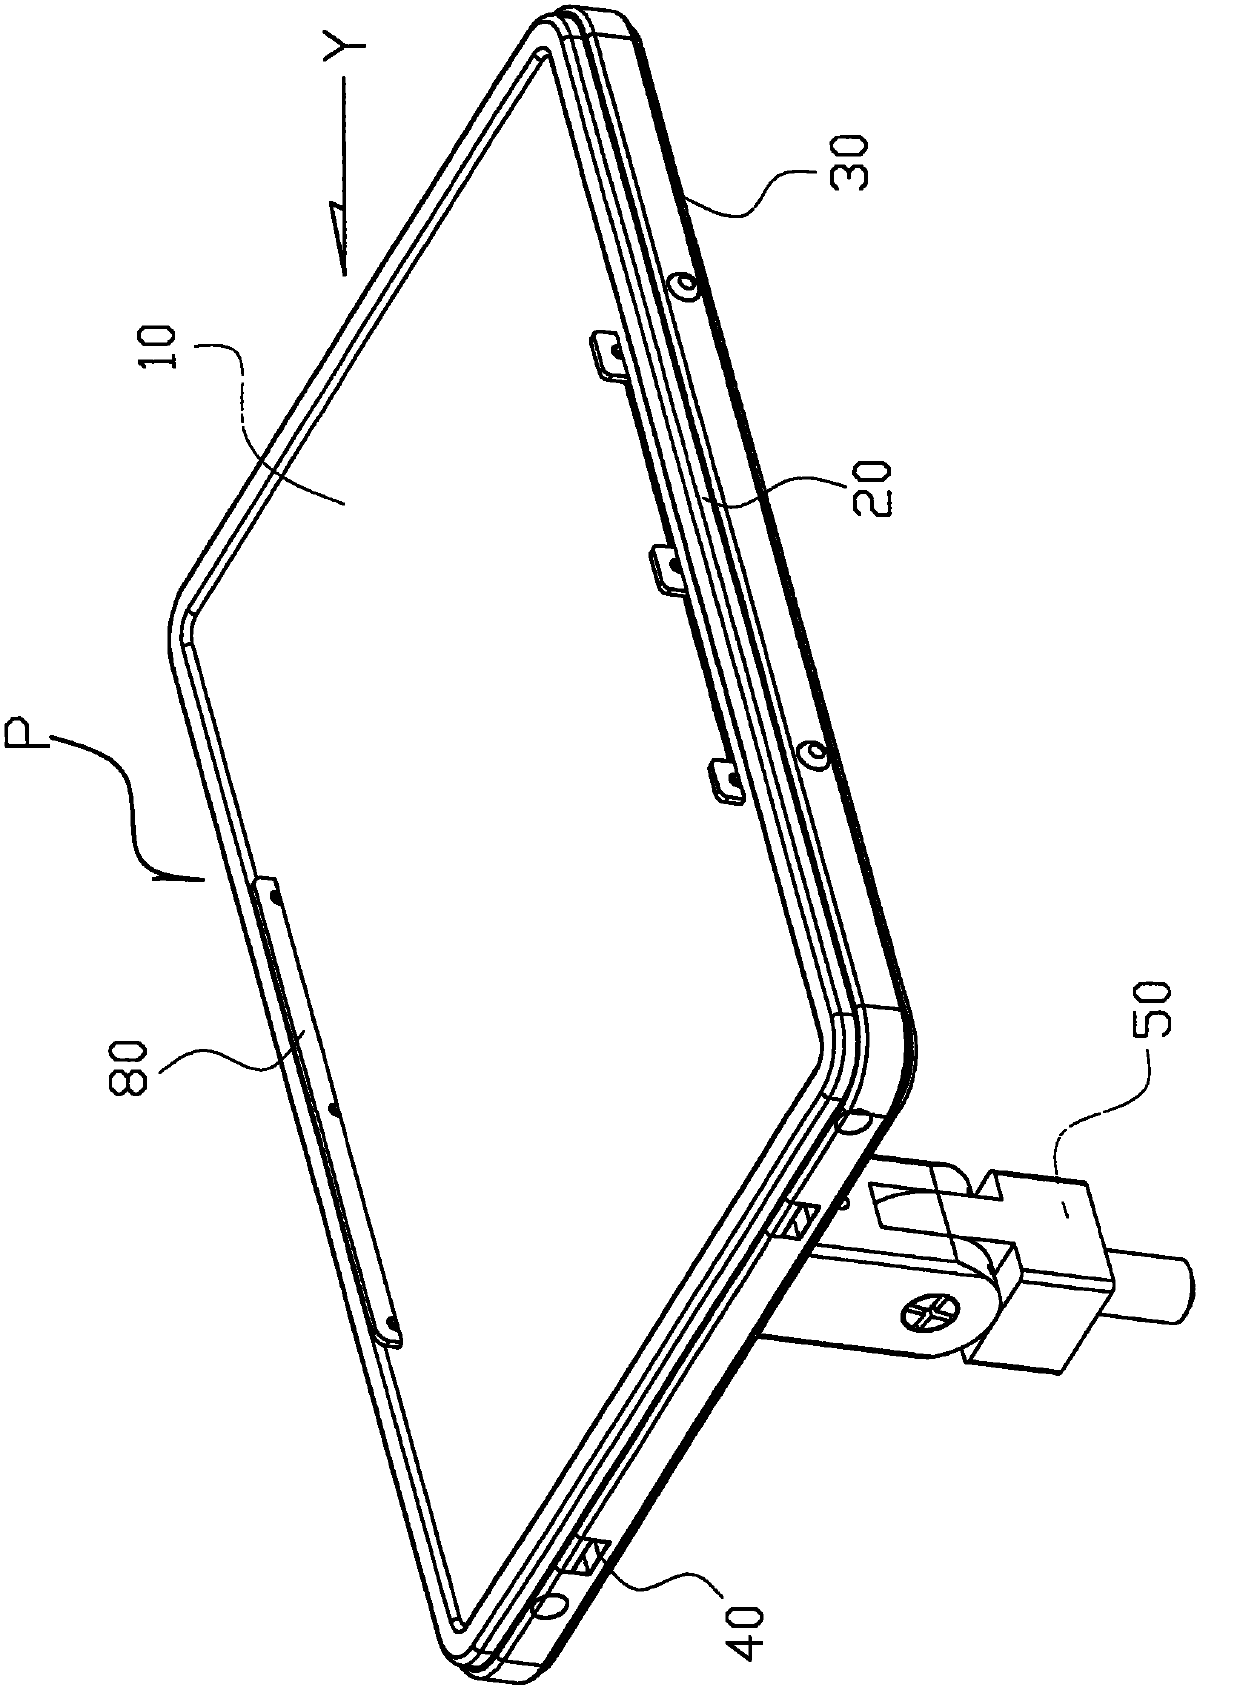 Multifunctional tray device capable of being attached onto seats or beds